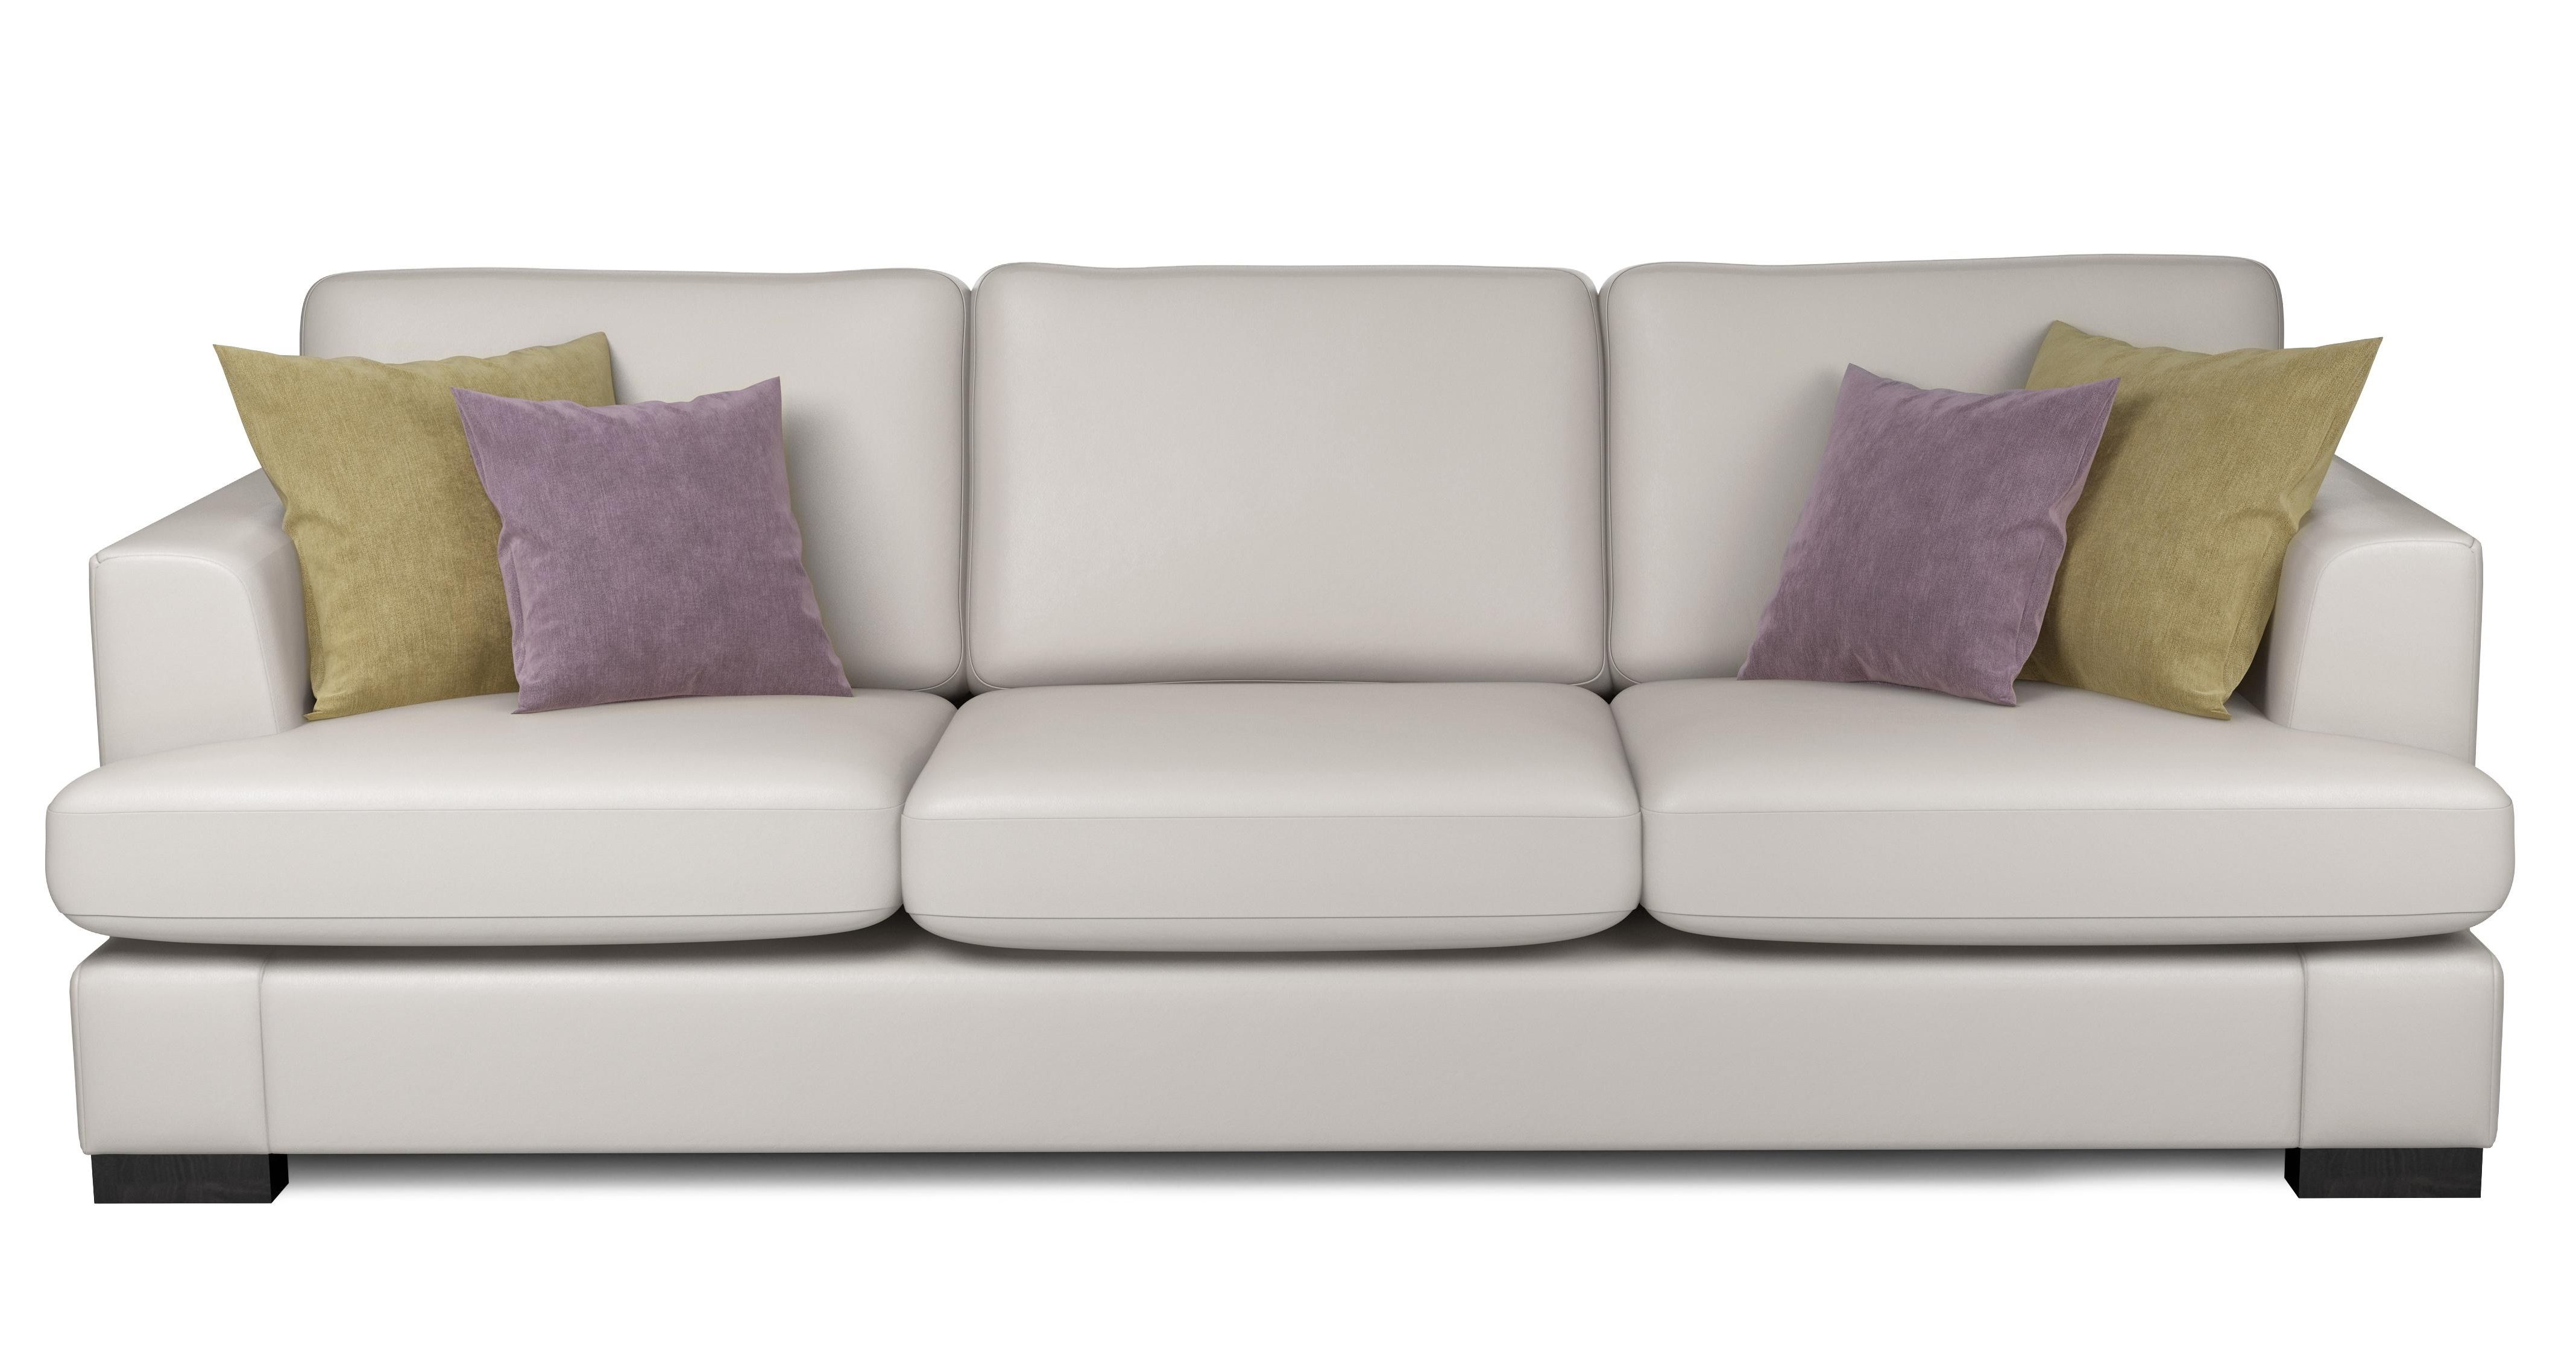 4 Seater Leather Sofa – Home And Textiles Within Preferred 4 Seat Leather Sofas (View 6 of 15)